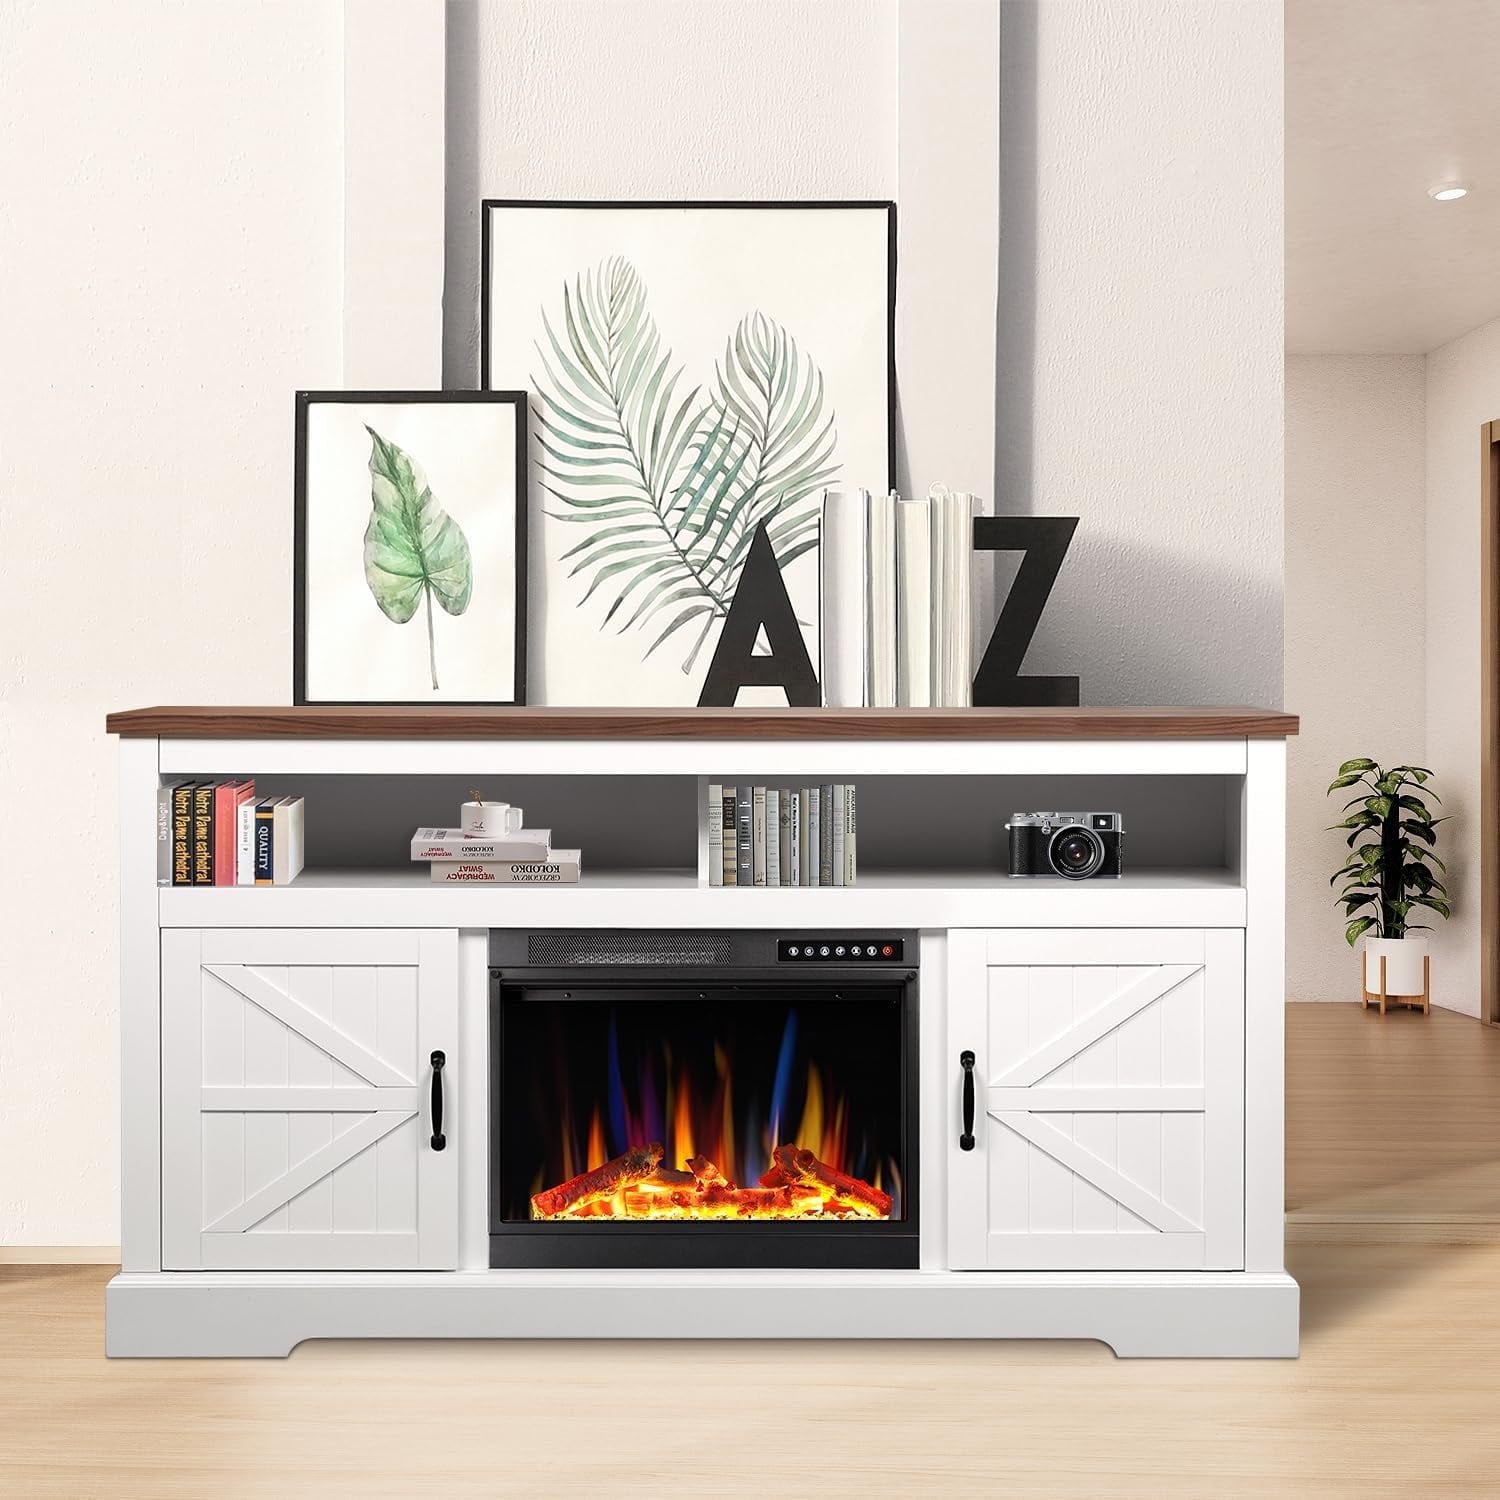 Auseo 48'' Electric Fireplace Mantel，Remote Control, Adjustable LED Flame, 750W/1500W Free Standing Fireplace（White）